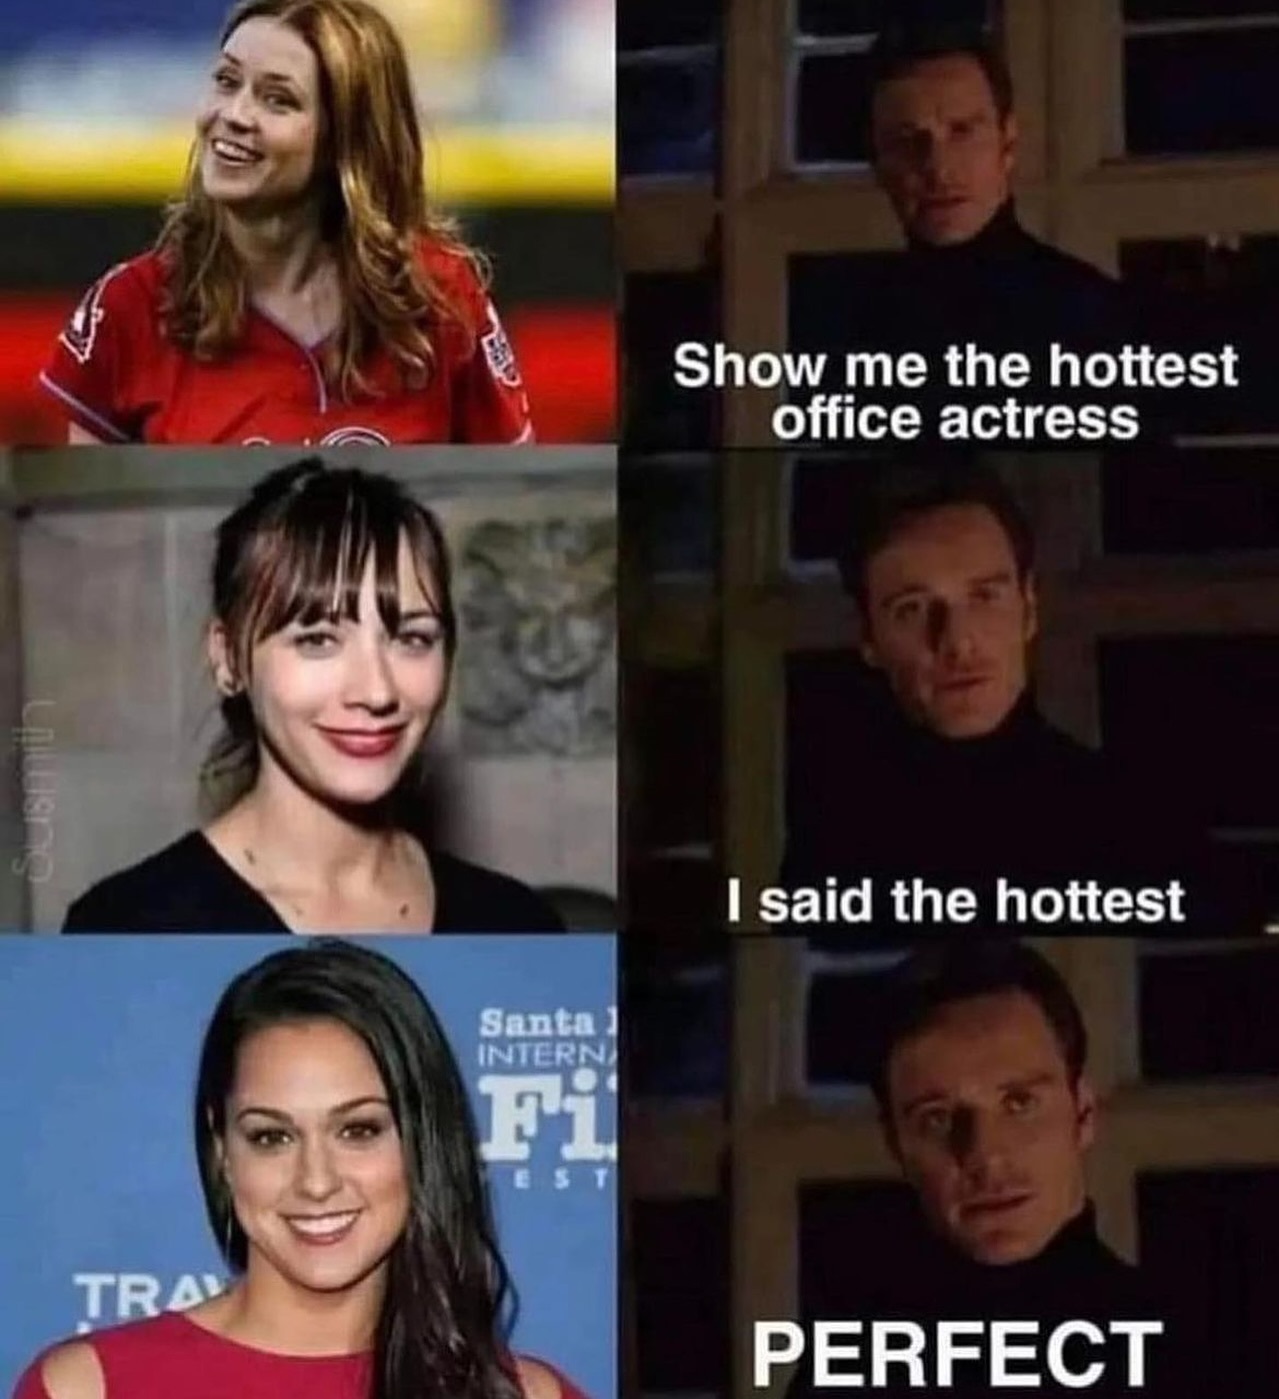 Show me the office actress